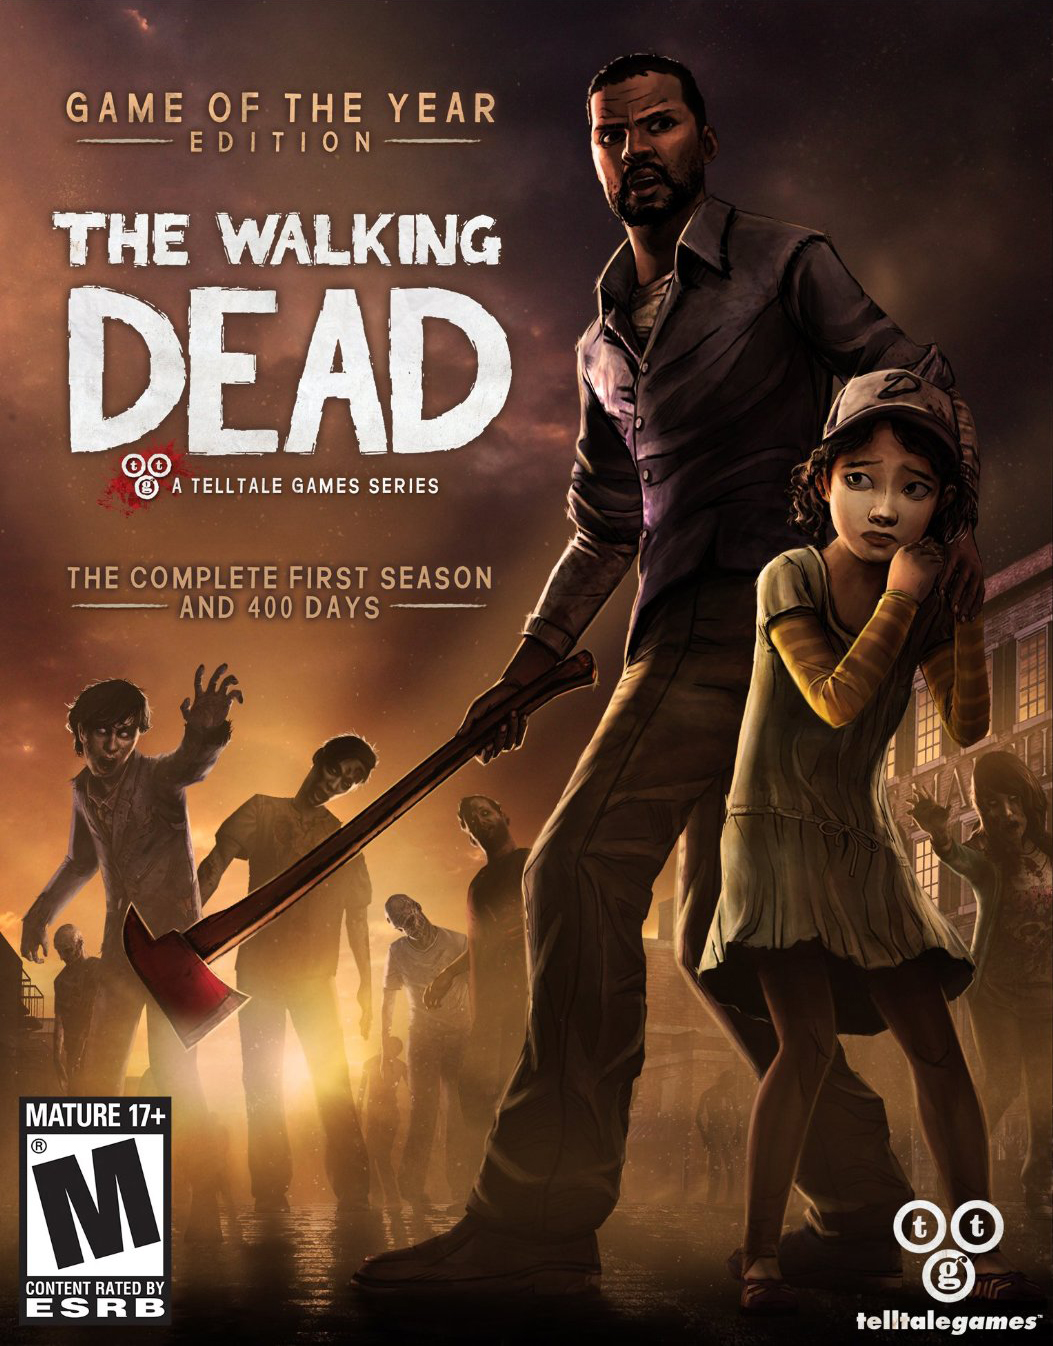 https://vignette.wikia.nocookie.net/walkingdead/images/4/4f/TWD_GOTY_Edition.png/revision/latest?cb=20131007220343